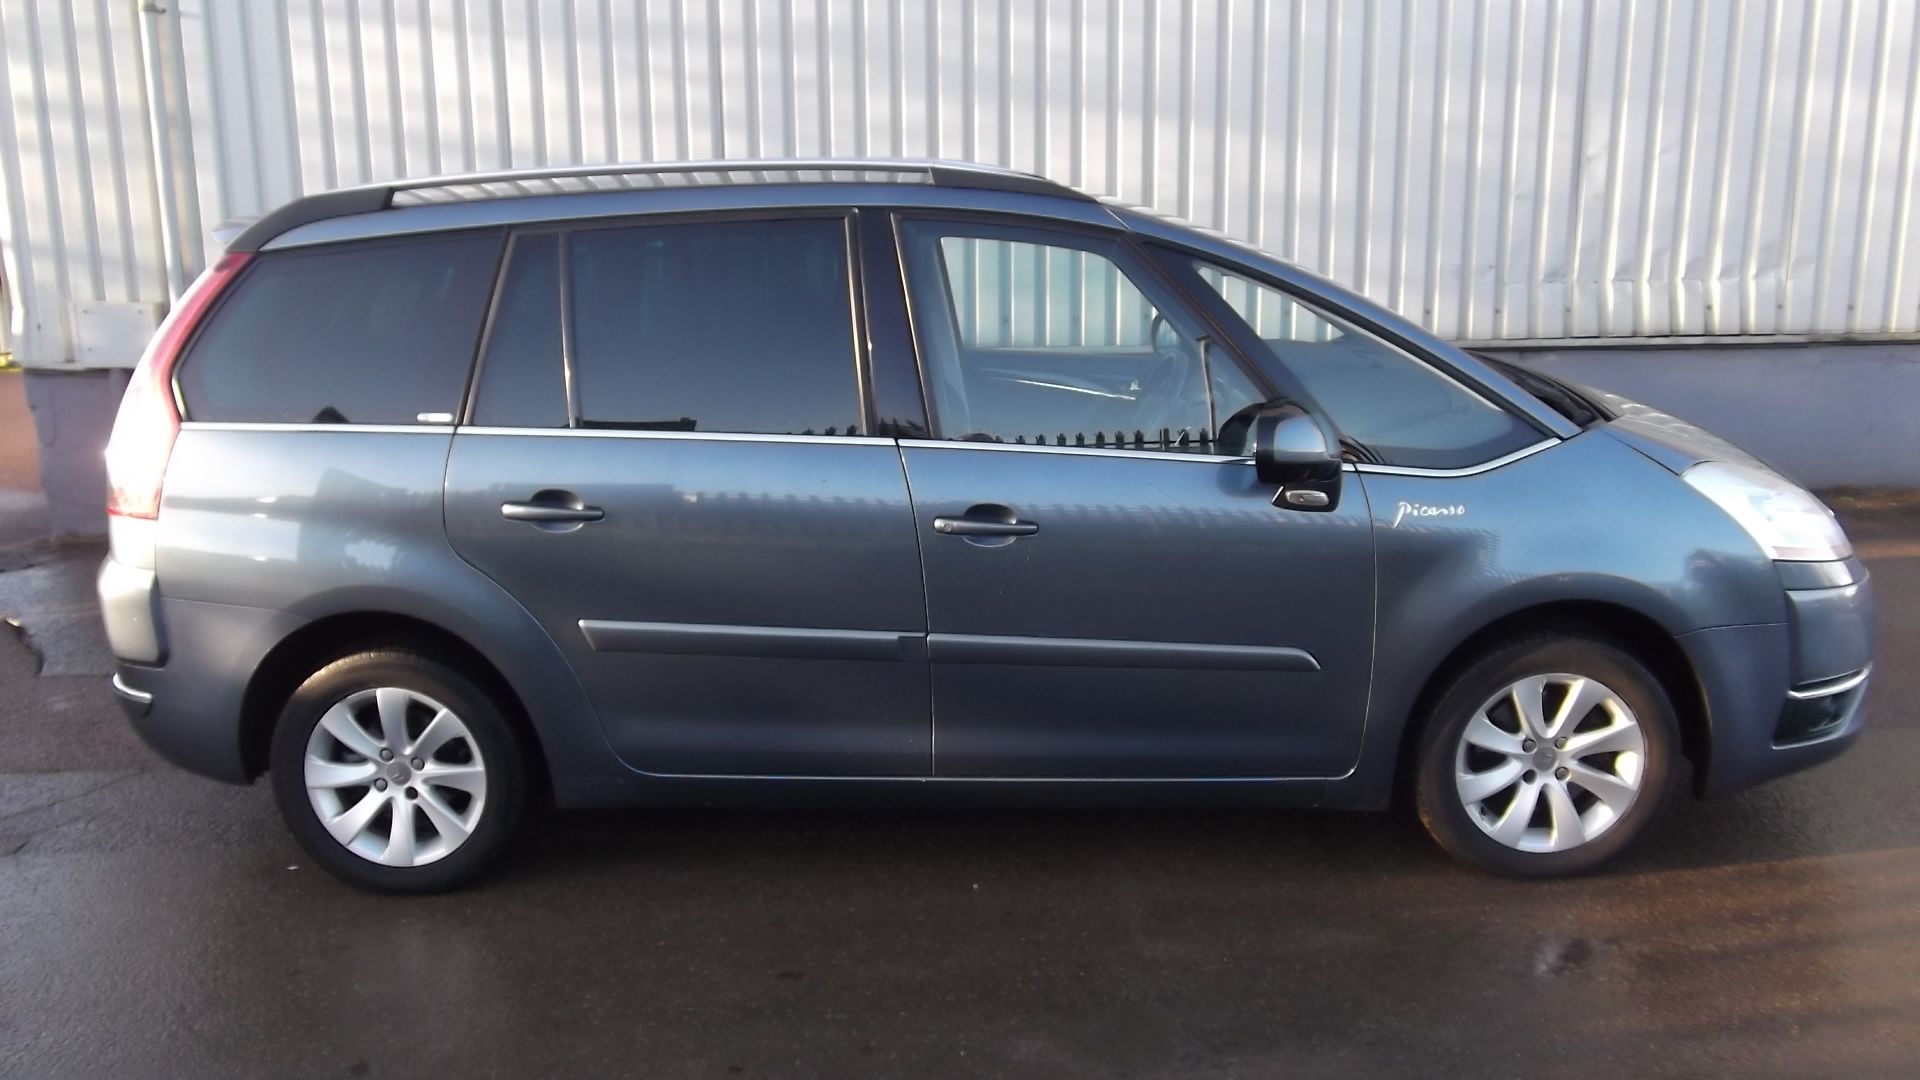 2007 Citroen C4 Picasso 7 Seater Exclusive 2.0 HDI Automatic 5 Door MPV - CL505 - NO VAT ON THE HAMM - Image 21 of 22